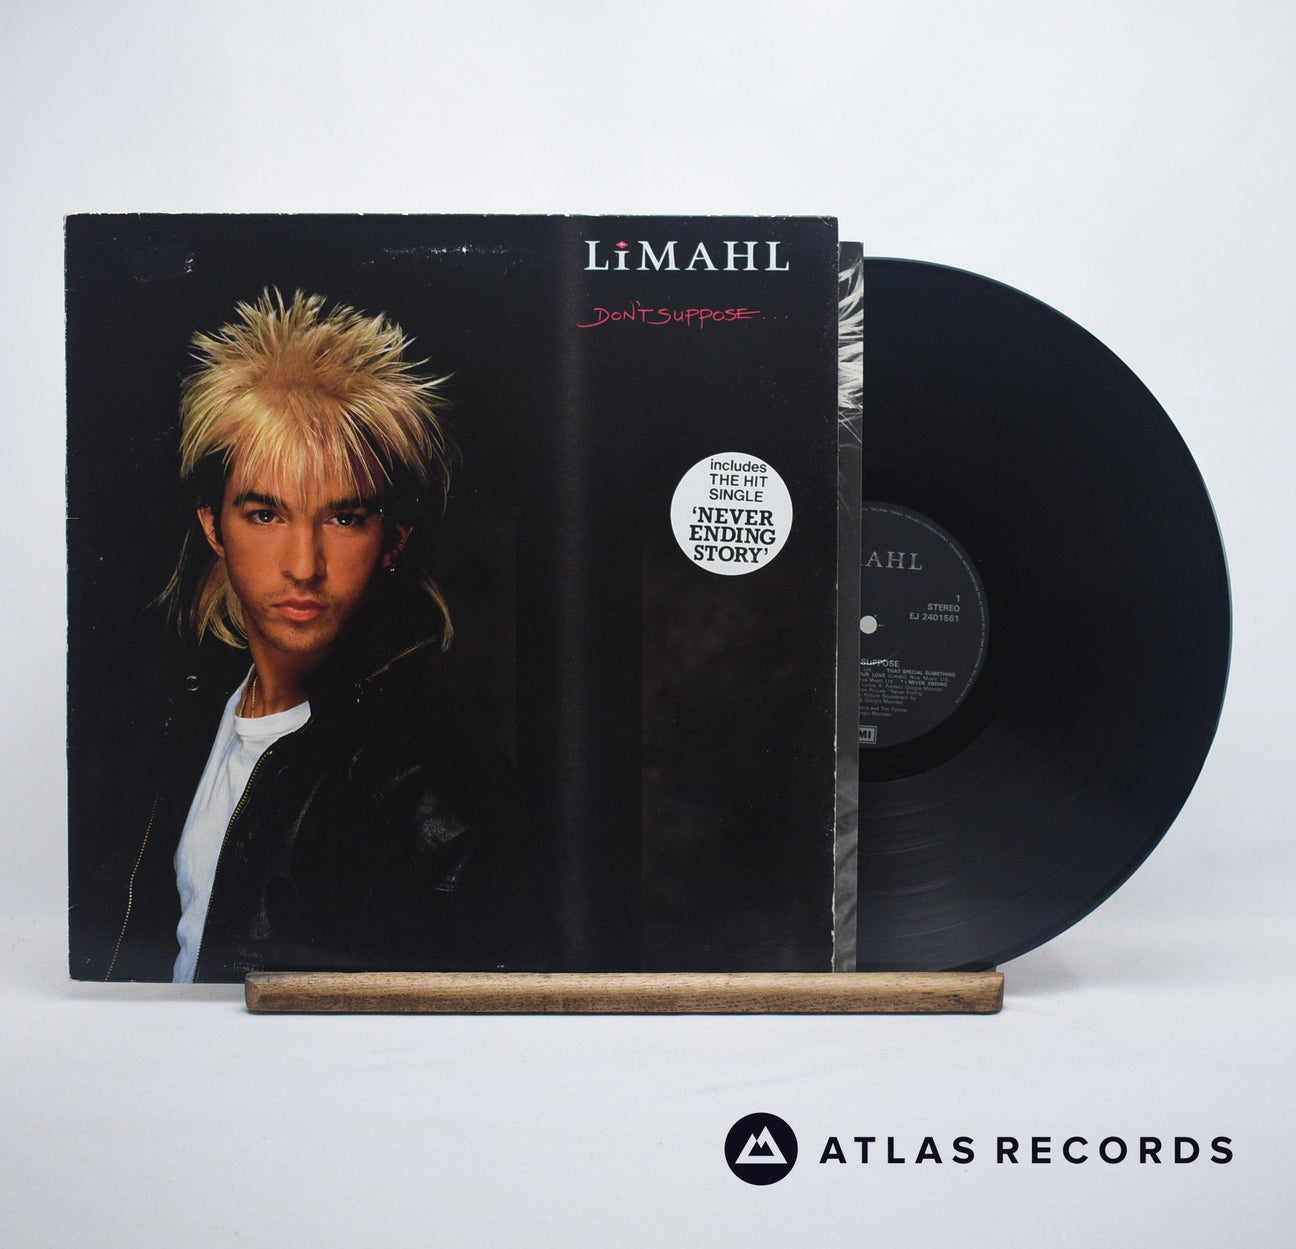 Limahl Don't Suppose LP Vinyl Record - Front Cover & Record